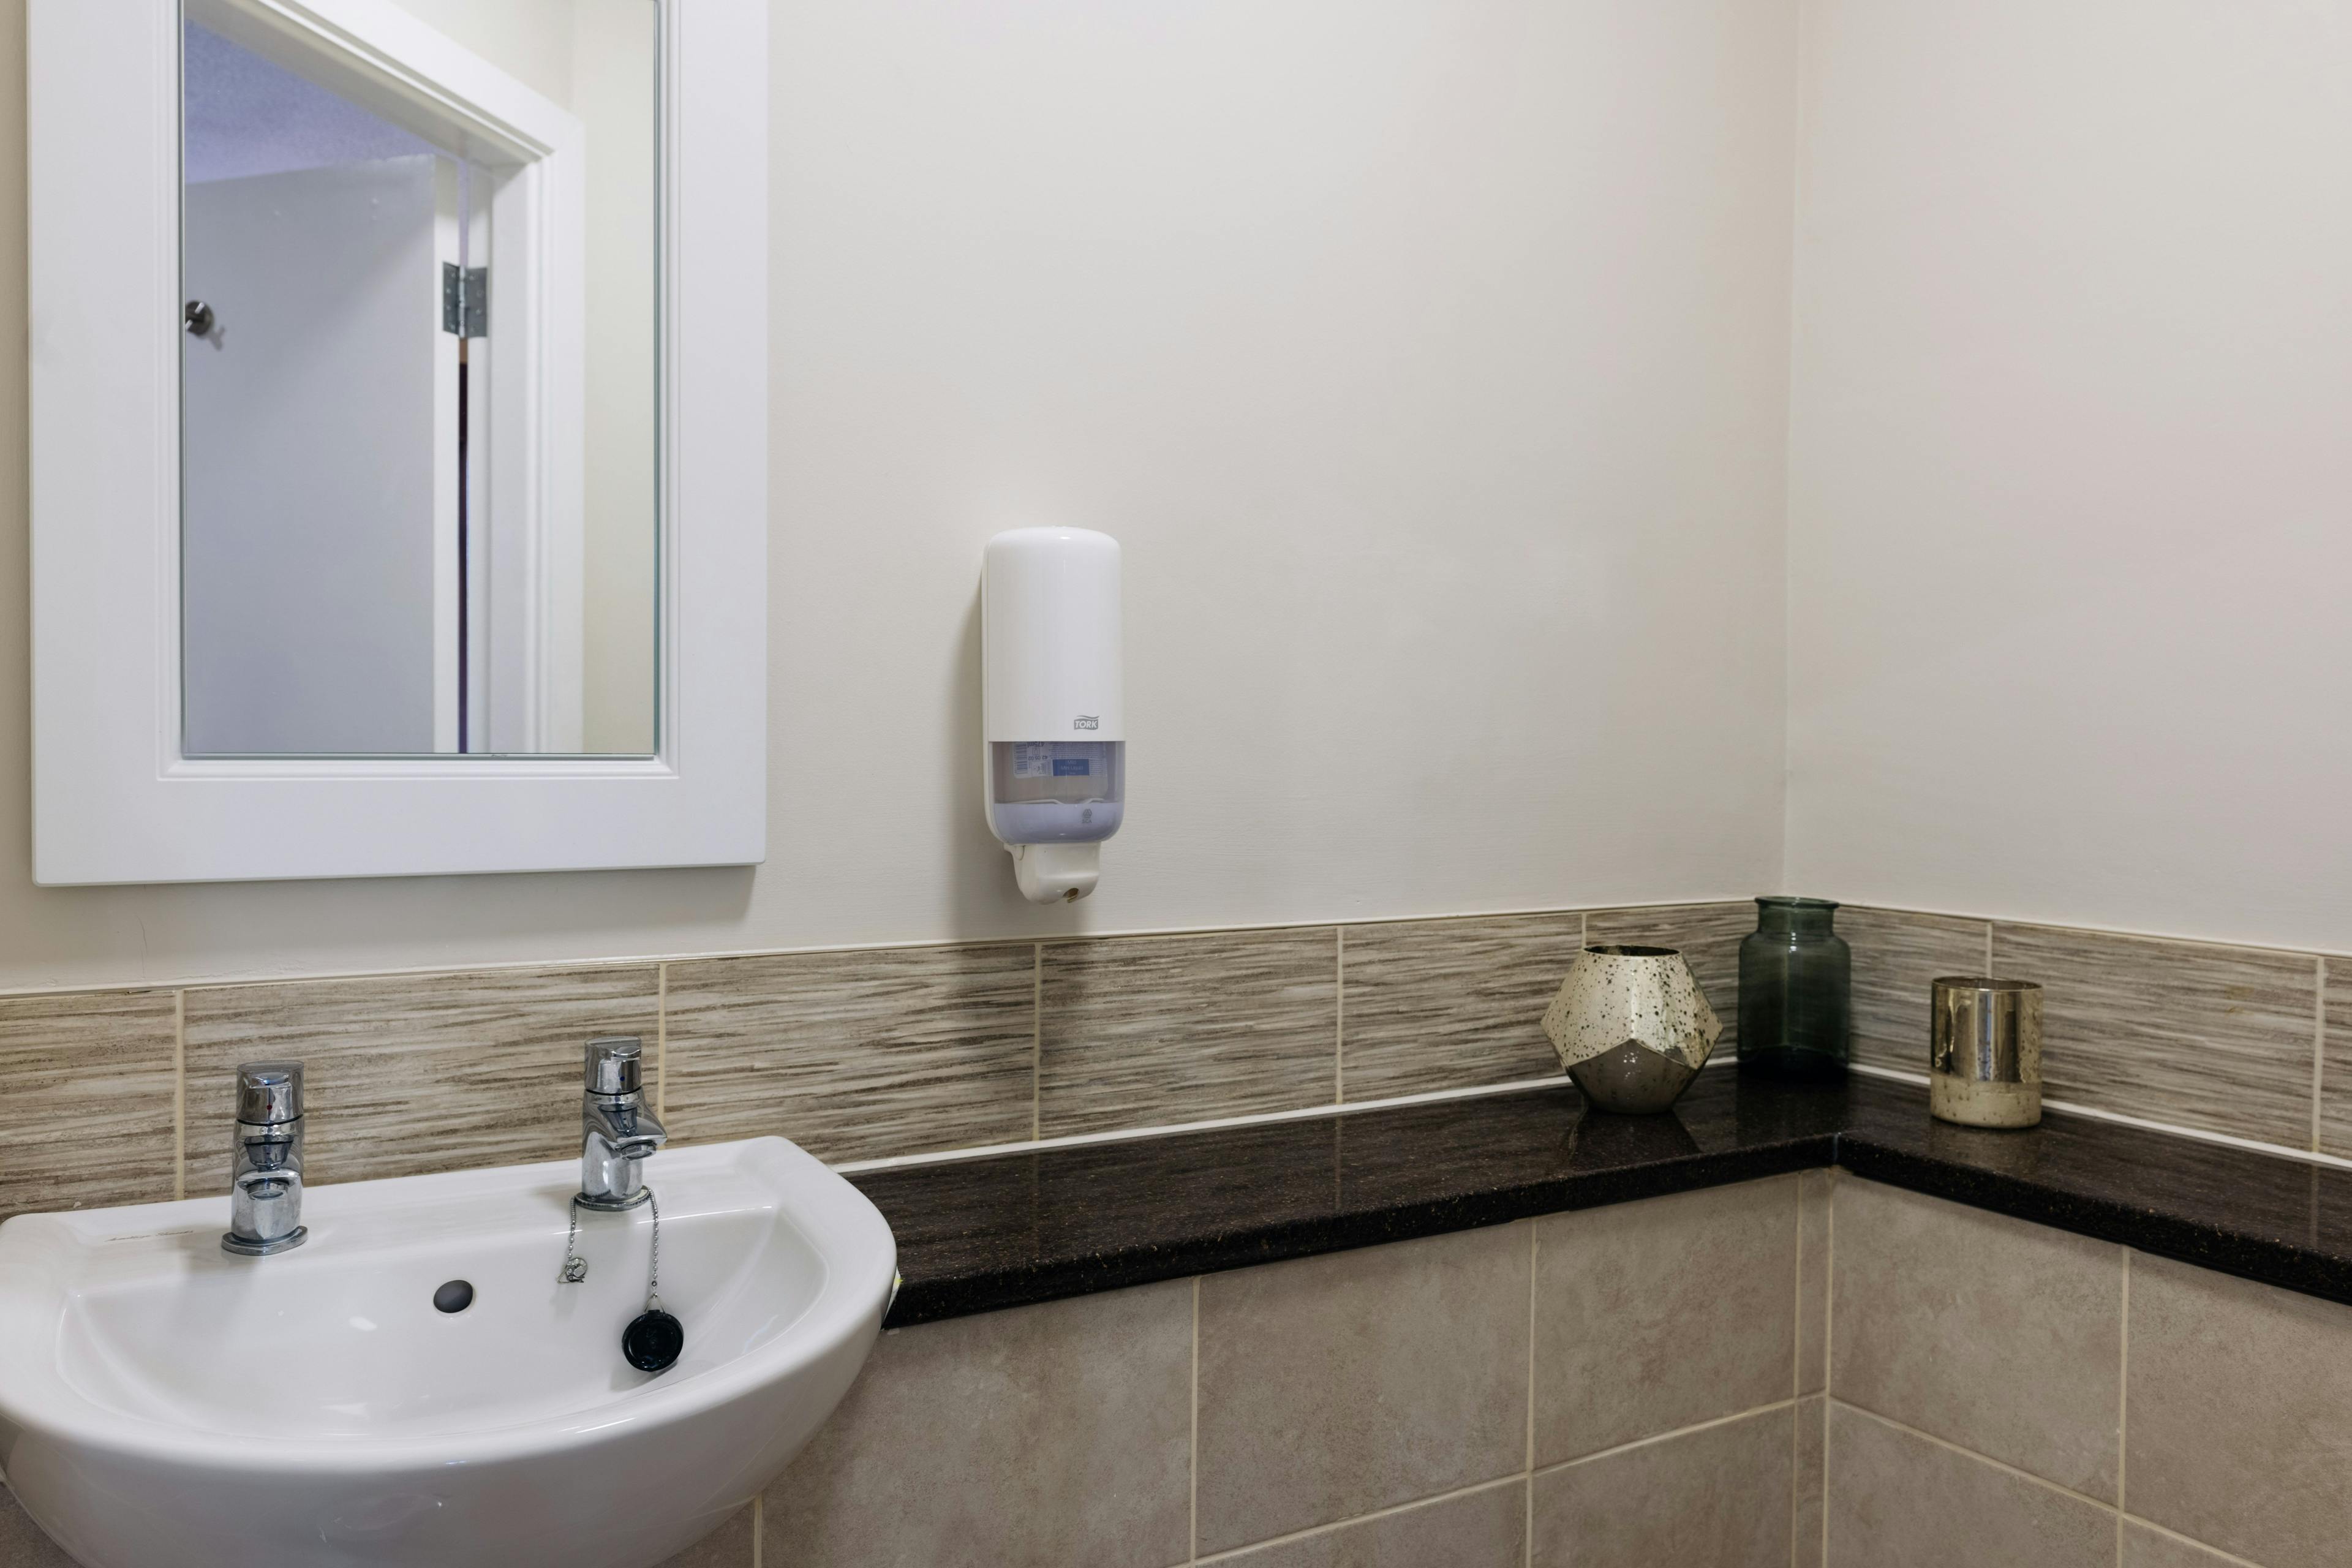 Bathroom at Lochduhar Care Home in Dumfries and Galloway, The Stewartry of Kirkcudbright